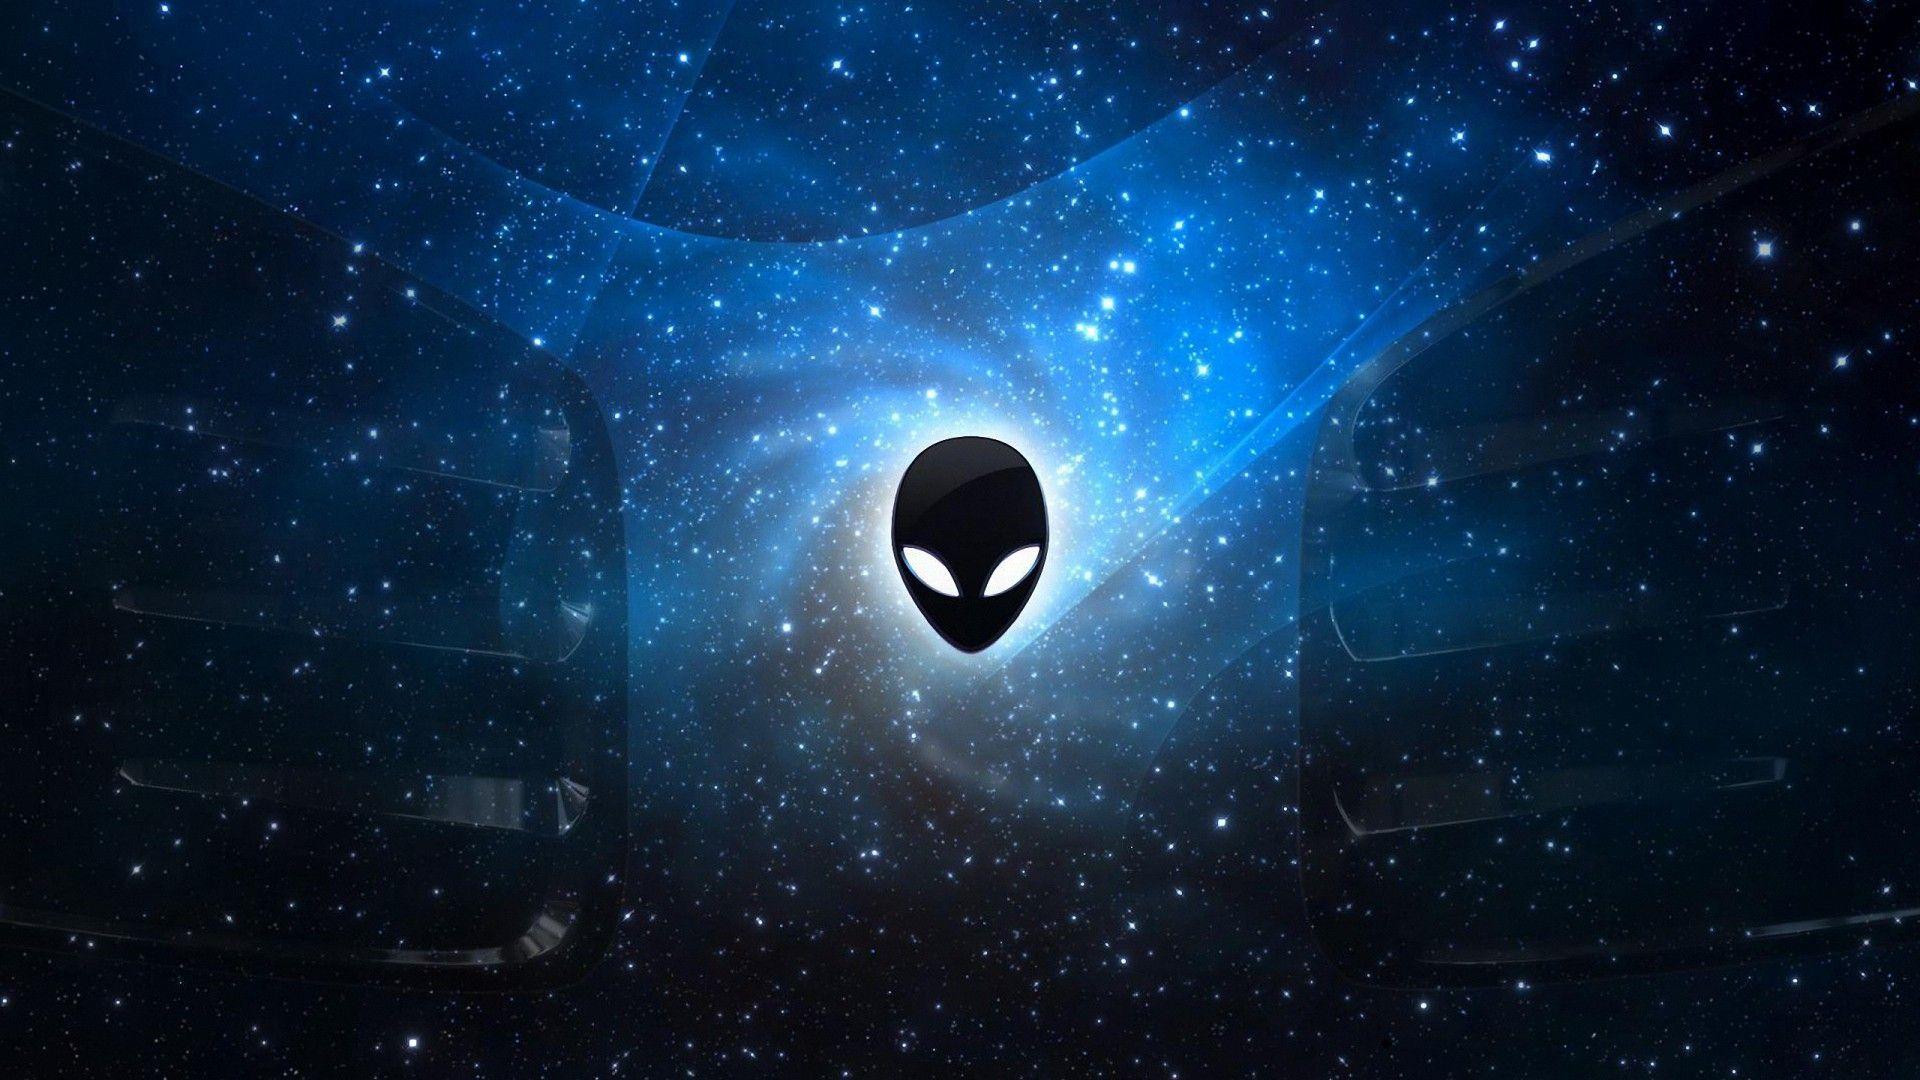 Alienware Moving Wallpapers - Top Free